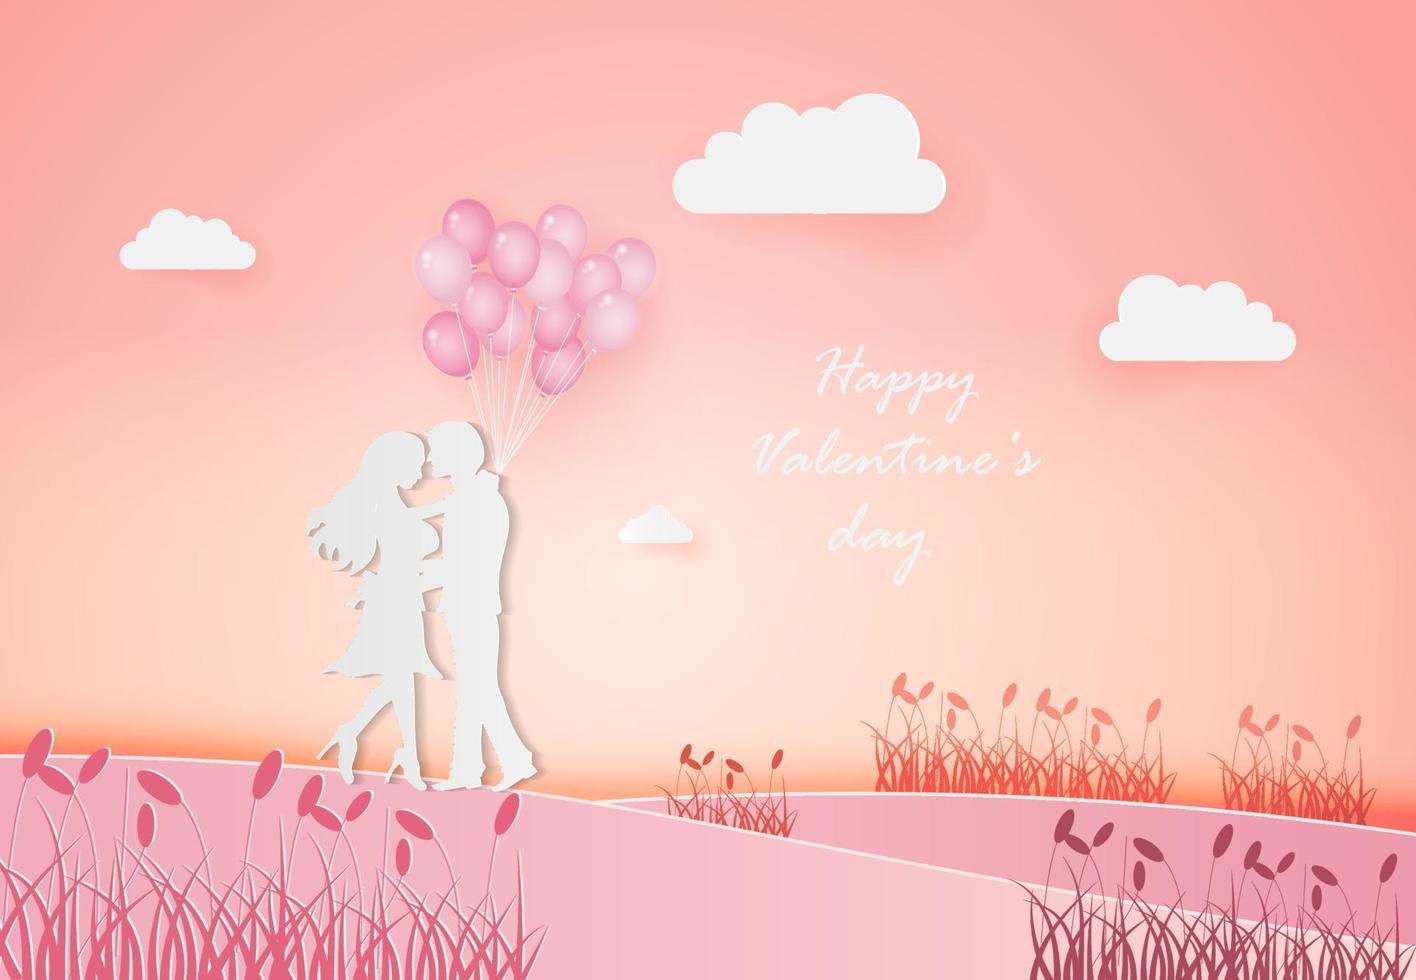 Invitation card Valentine's day abstract background with young joyful couple on field. vector